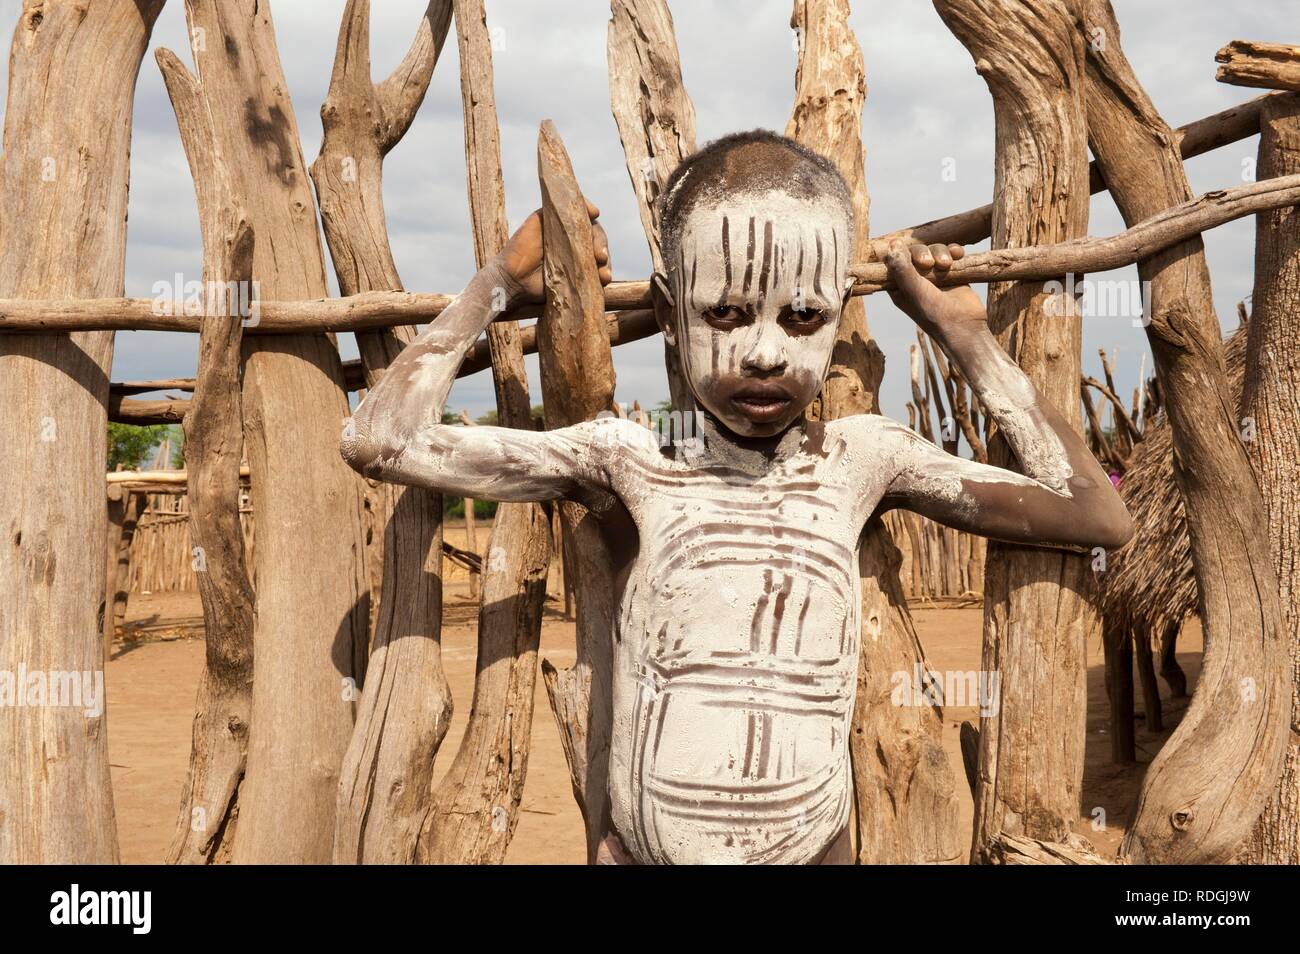 Karo boy with facial and body paintings, Omo river valley, Southern Ethiopia, Africa Stock Photo